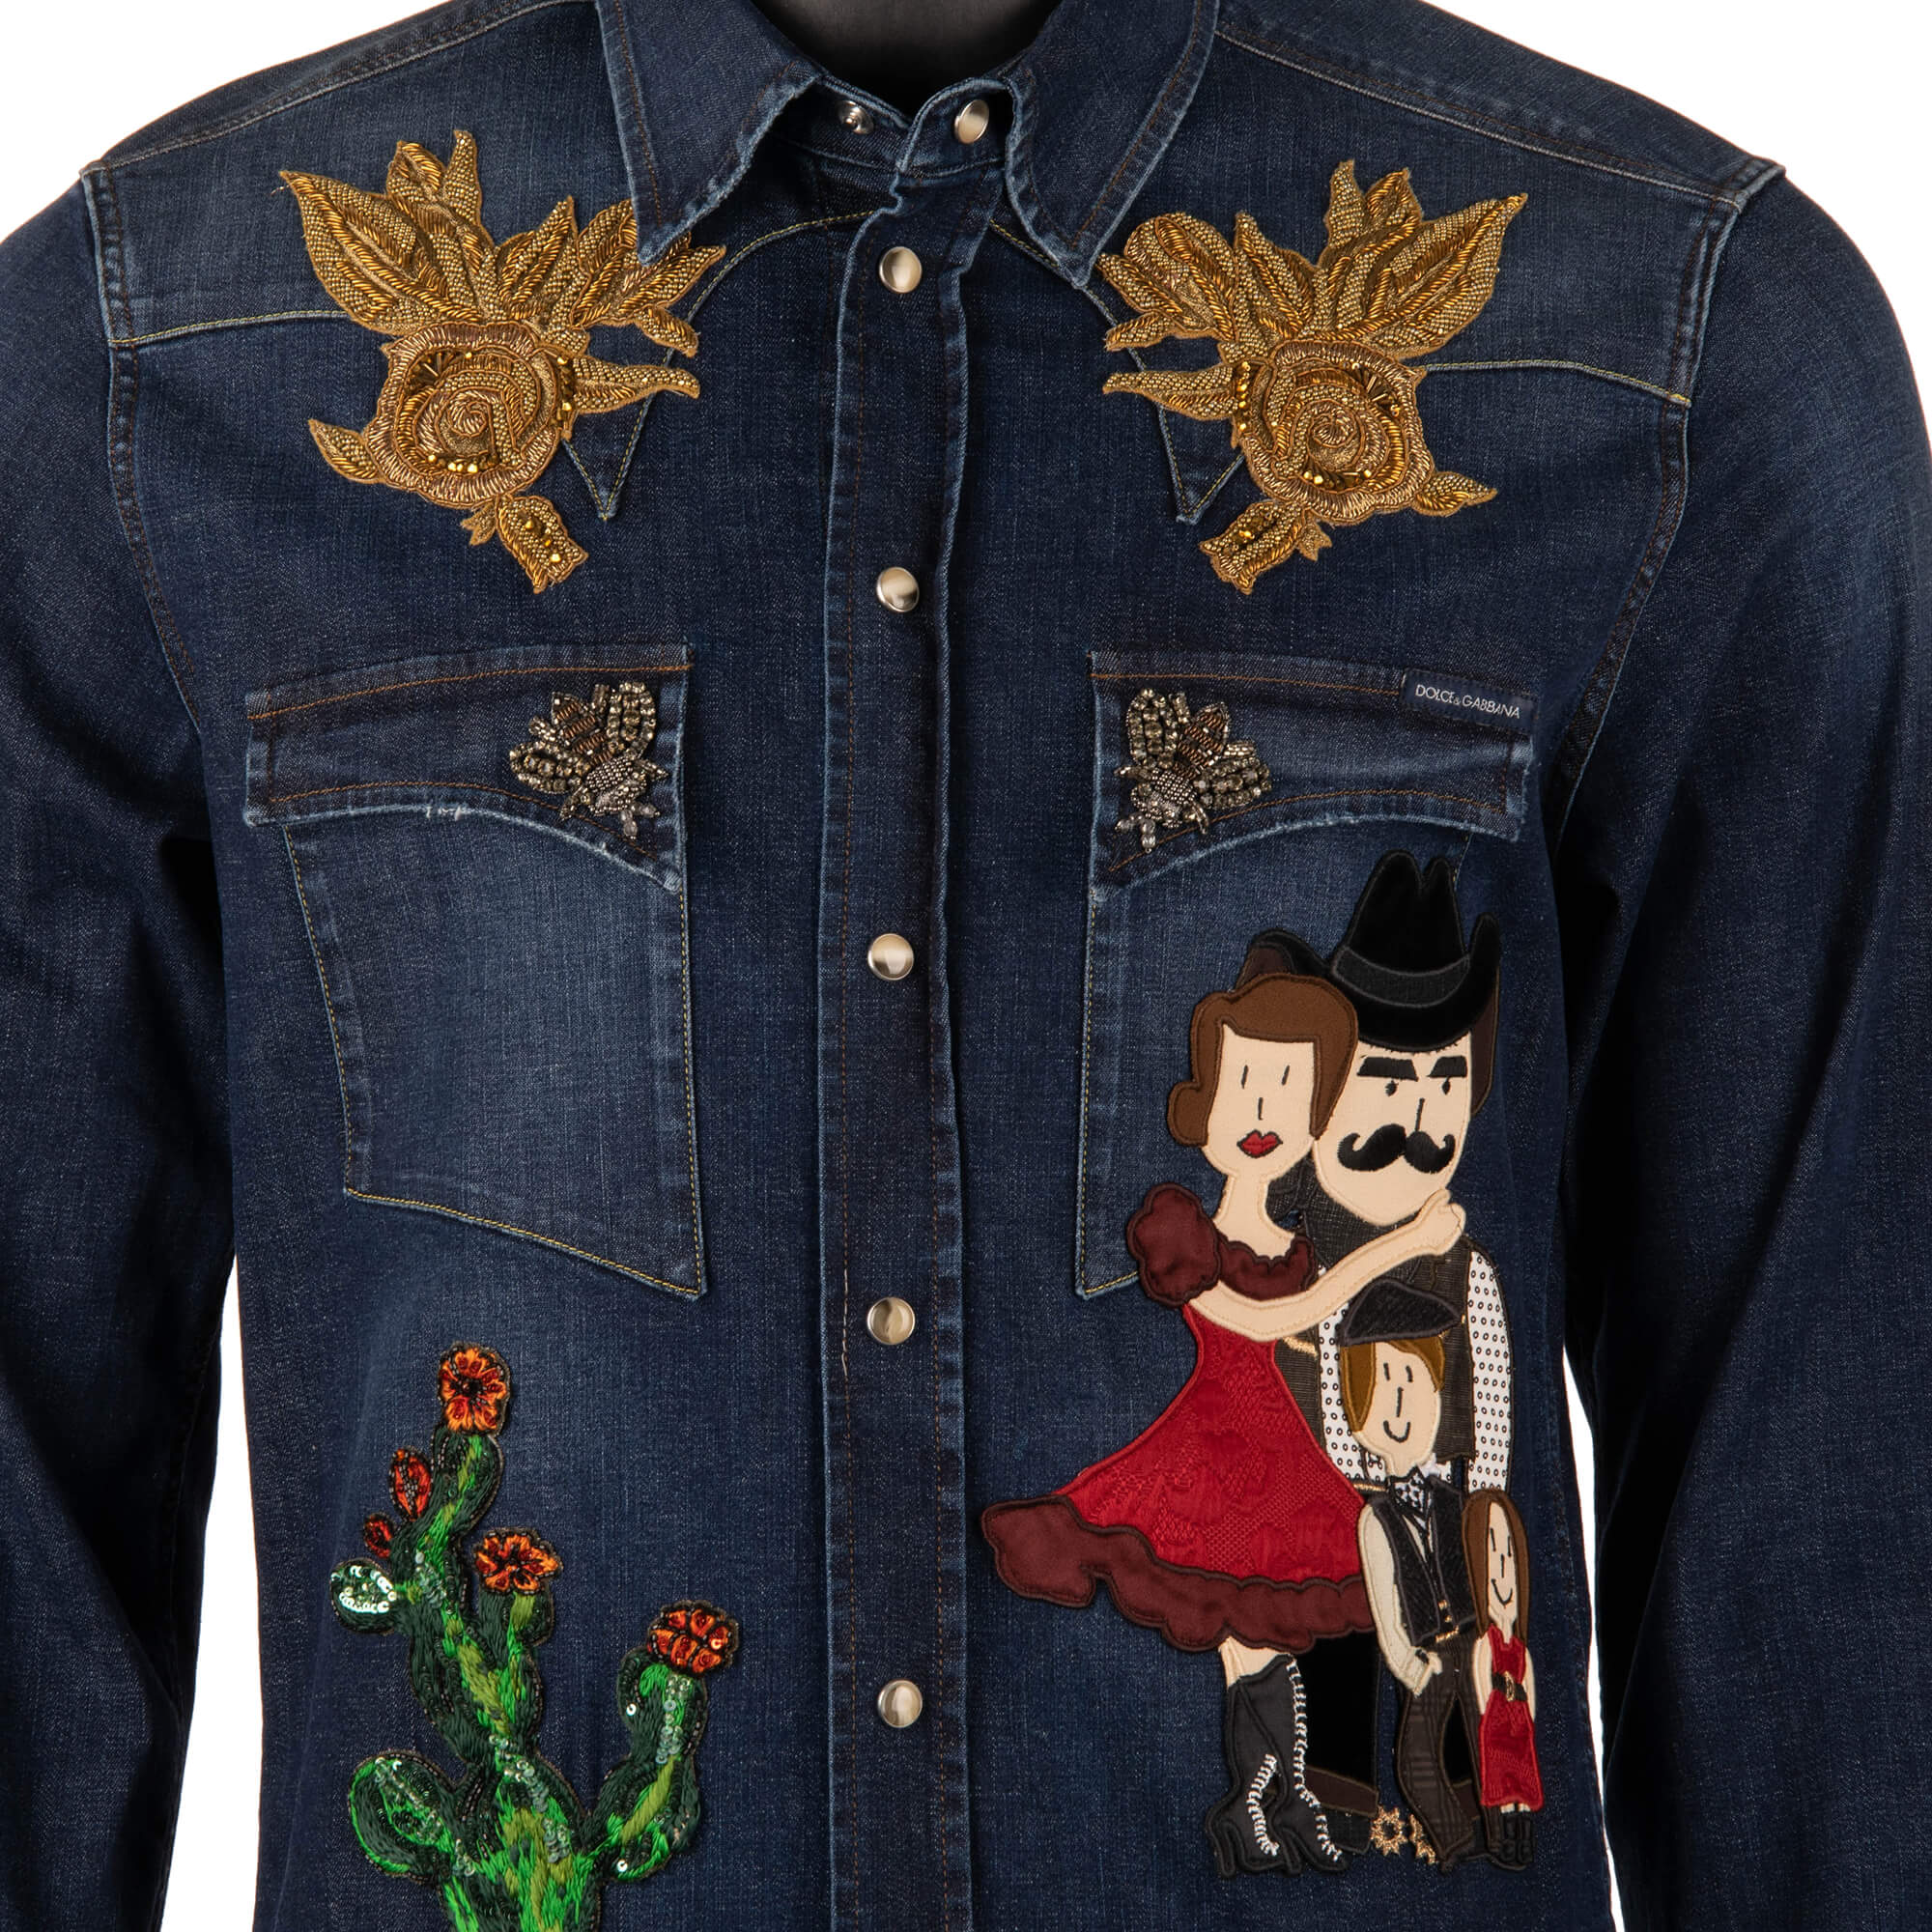 Dolce & Gabbana Goldwork Embroidery Rose Bee Denim Jeans Shirt Blue |  FASHION ROOMS